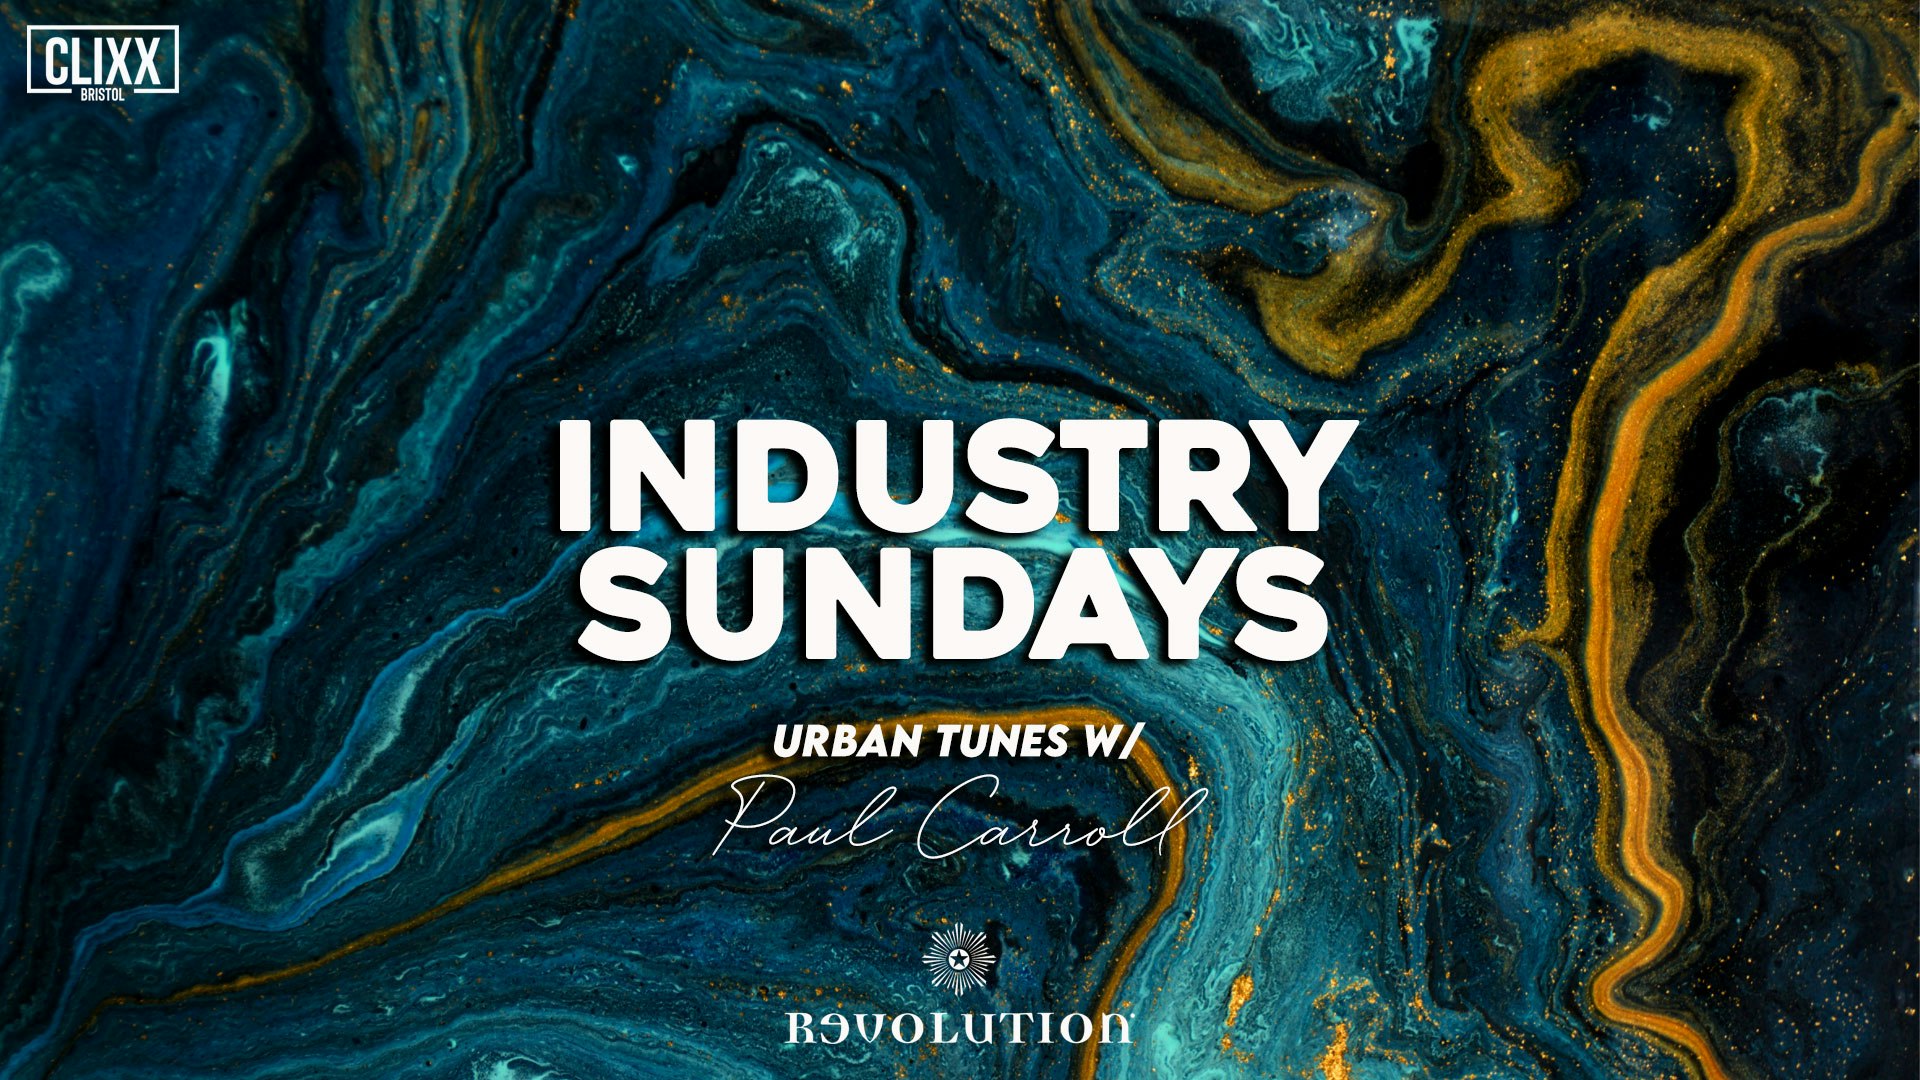 Industry Sundays – Urban Tunes w/ Paul Carroll – Limited FREE ENTRY Tickets selling fast